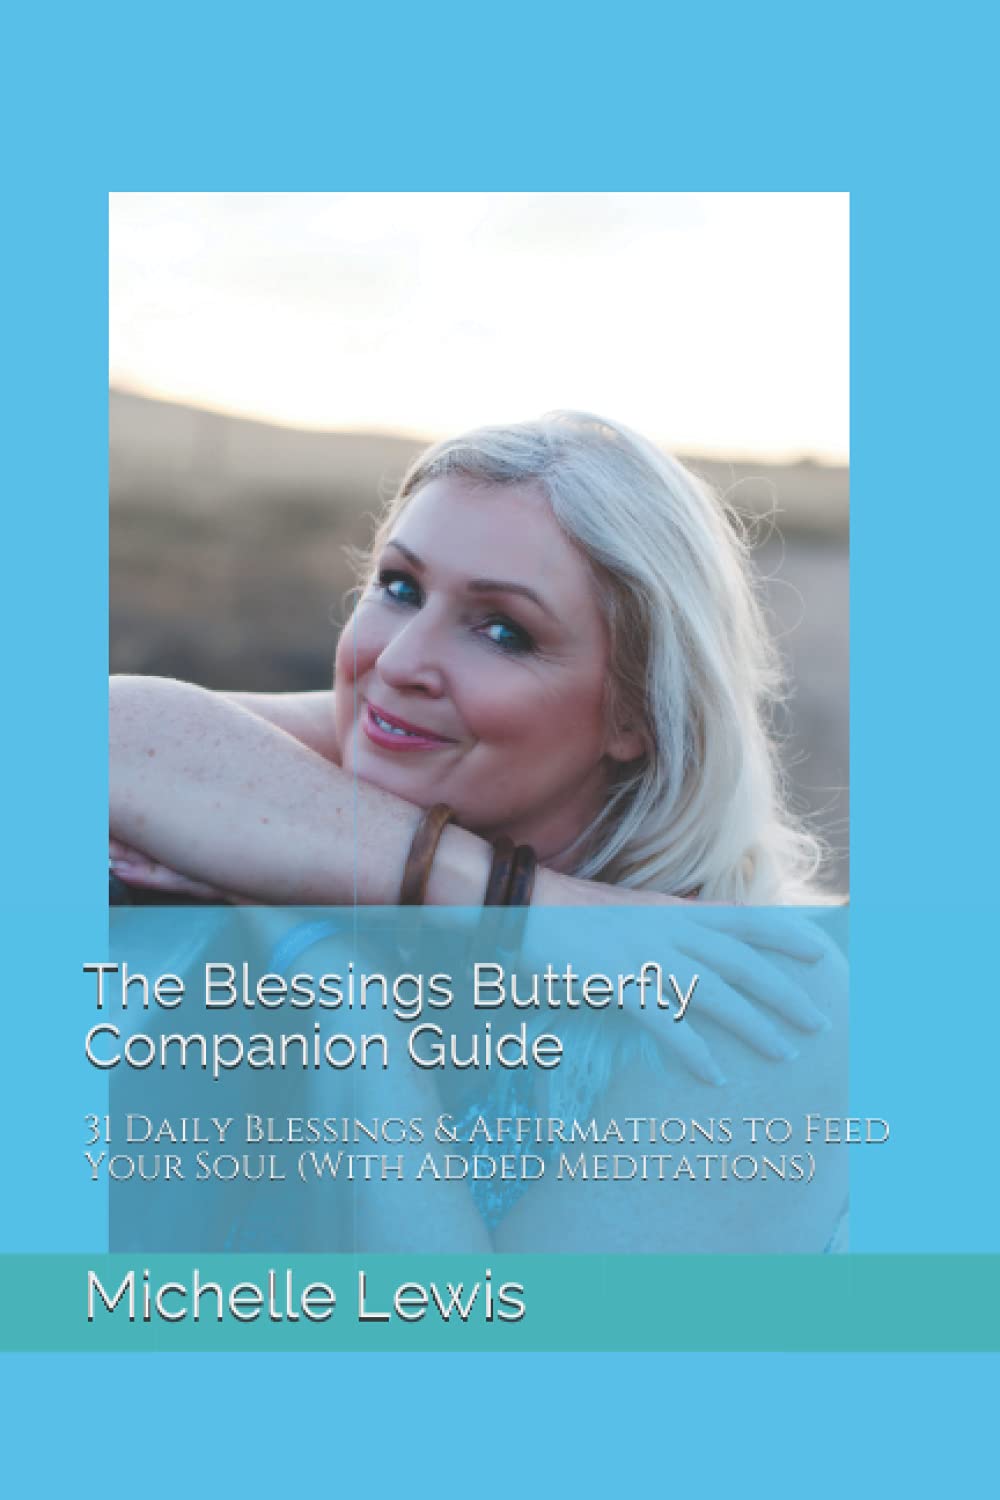 The Blessings Butterfly Companion Guide